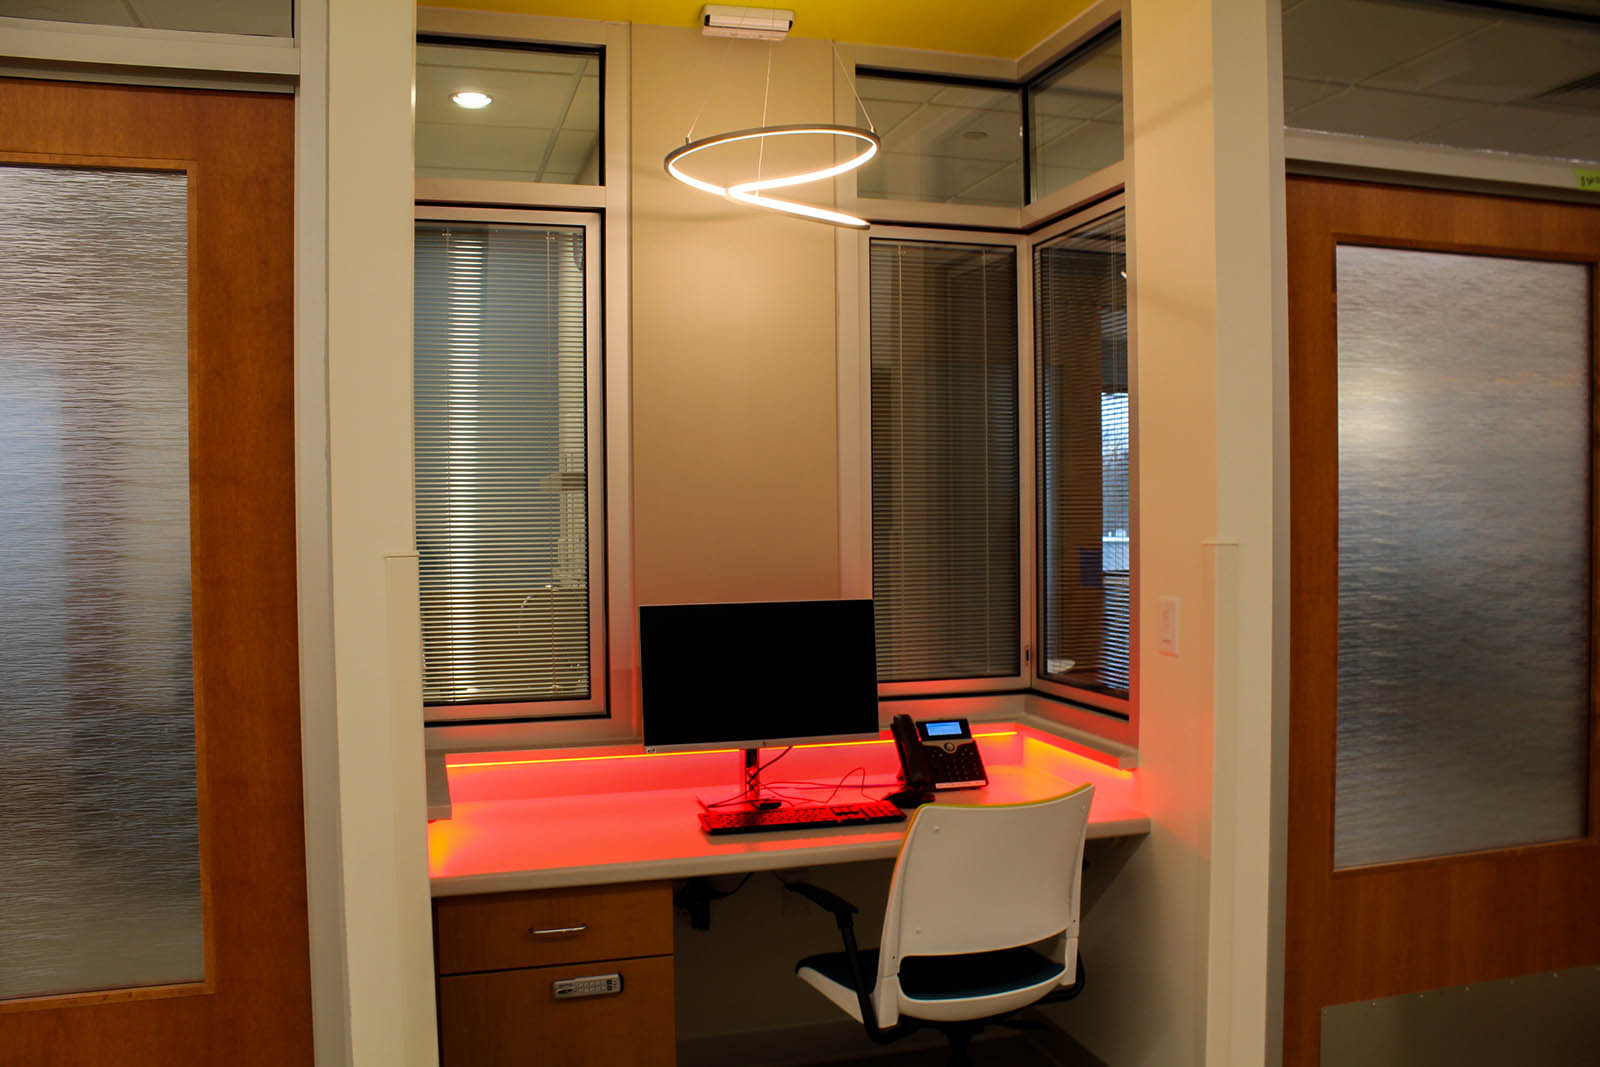 A computer station at desk with overhead LED lighting and red LED light accents surrounding the desk